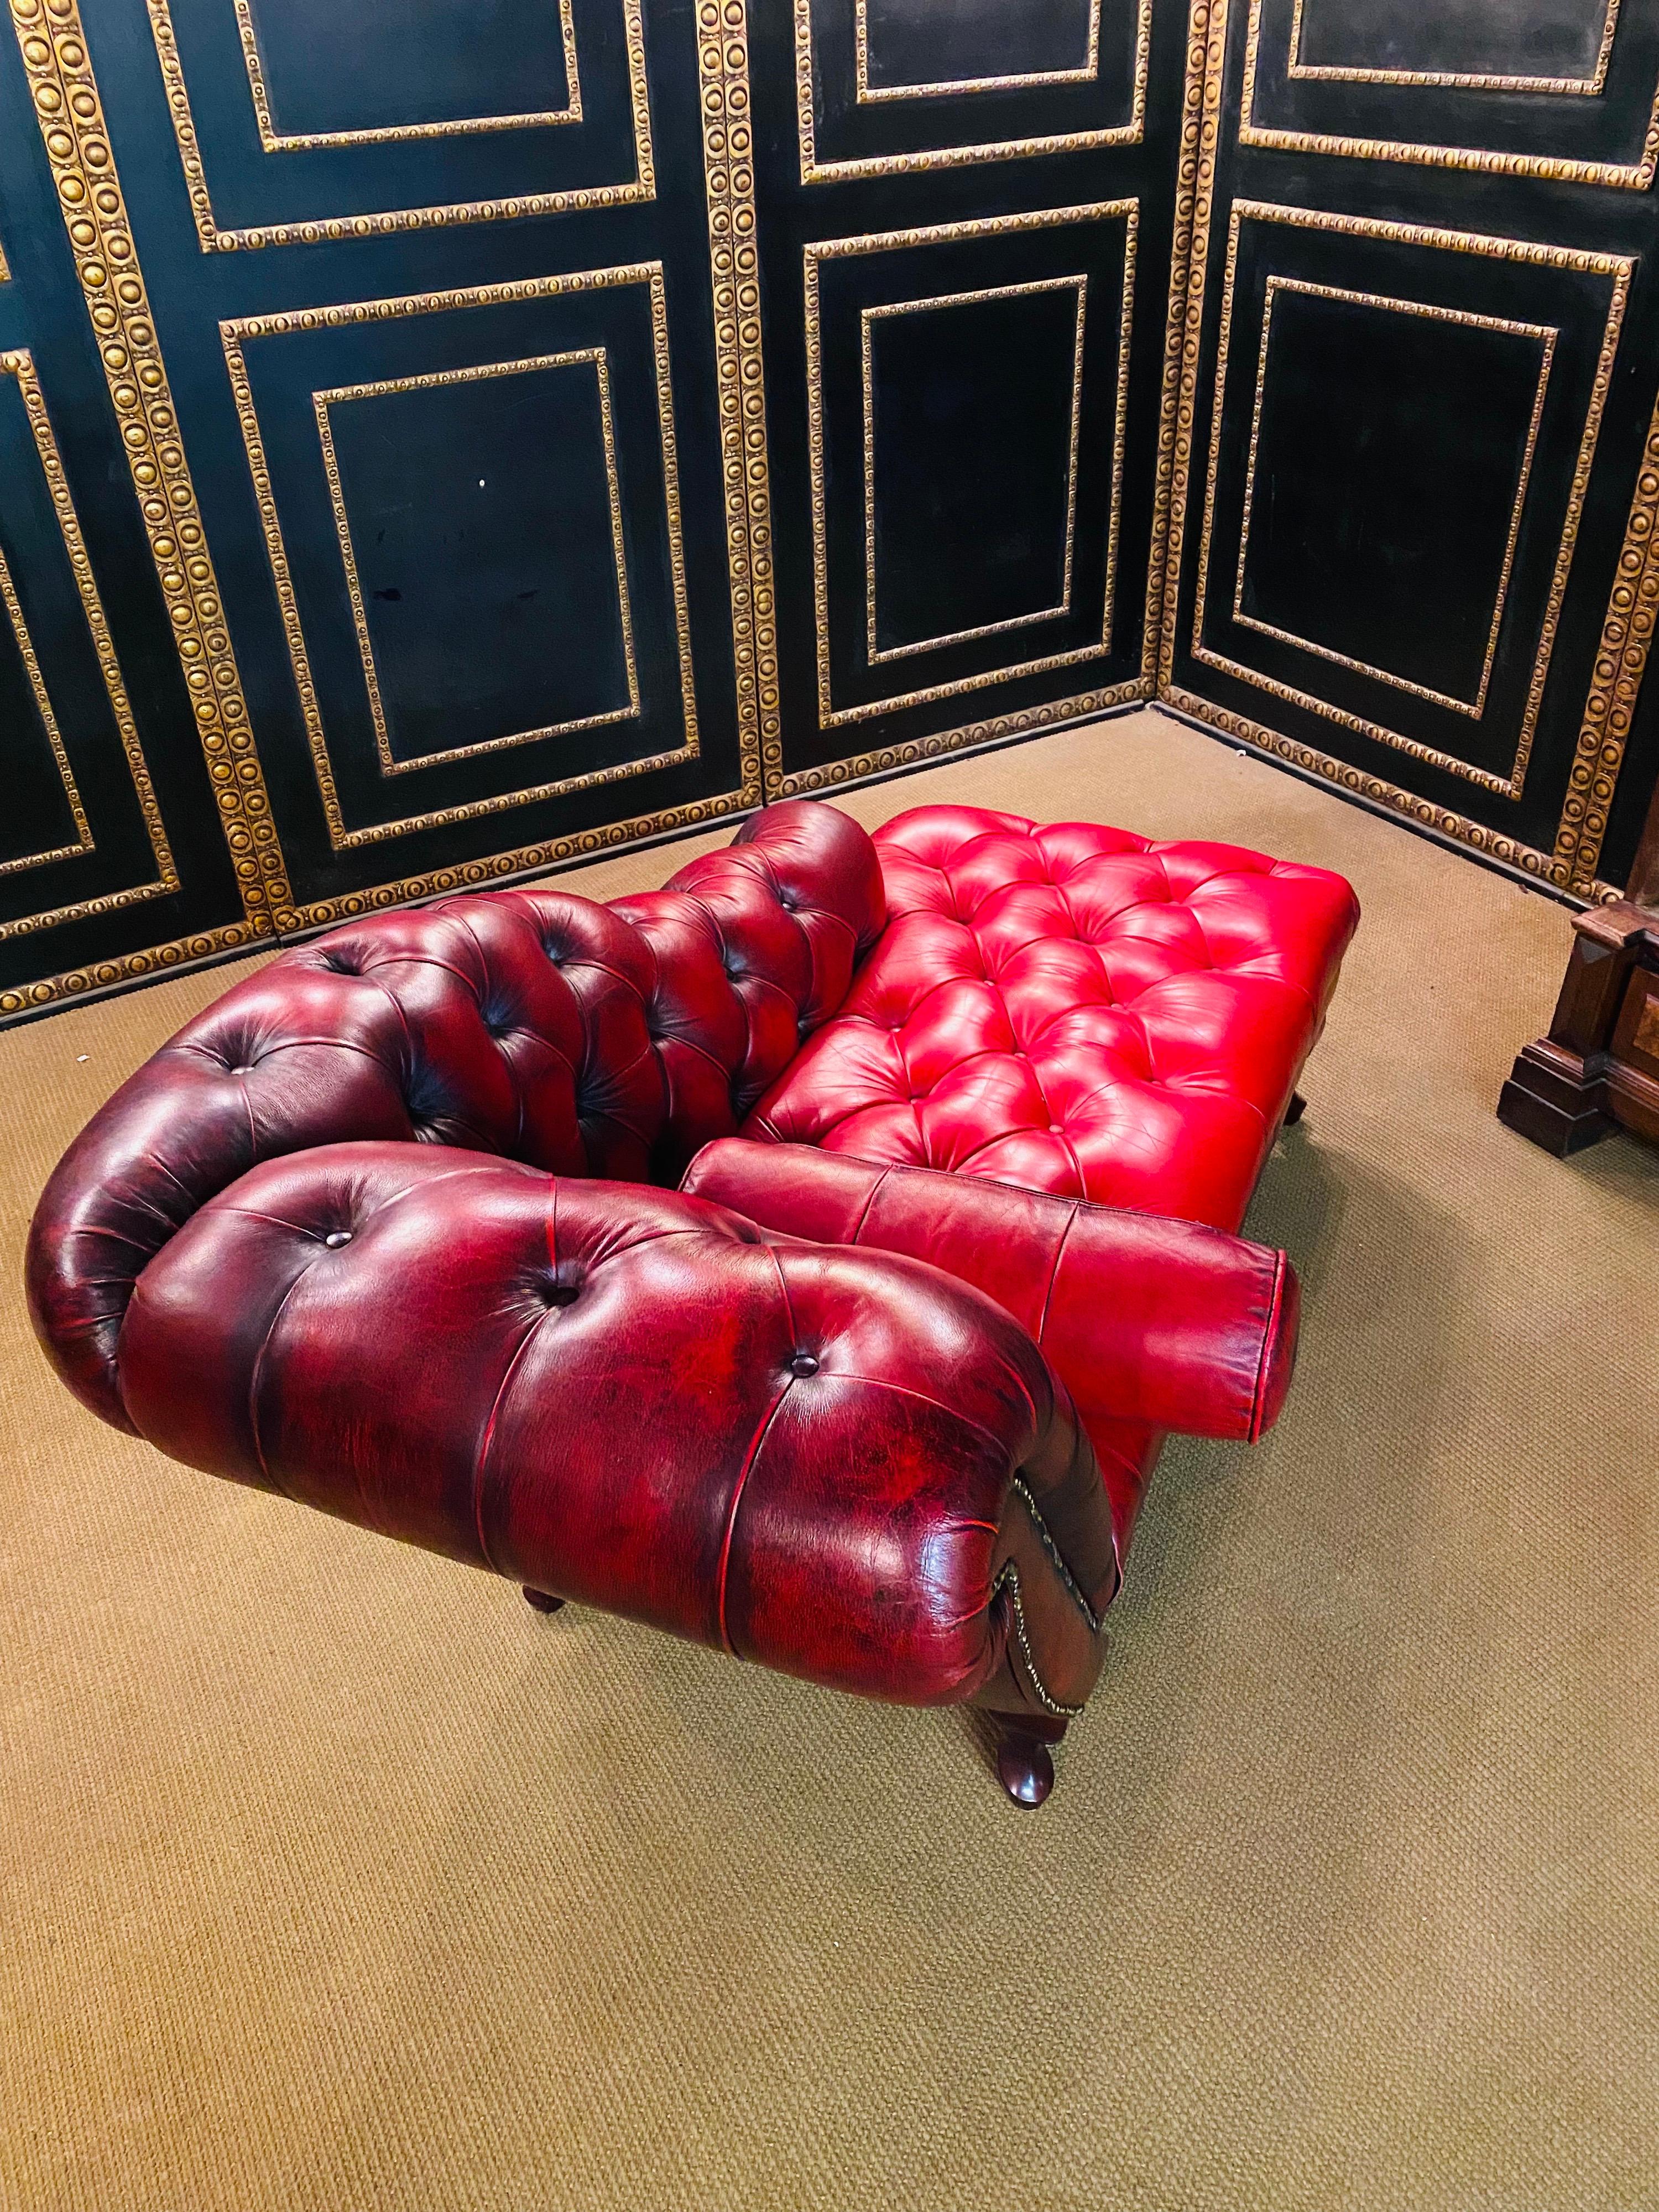 Lovely original vintage Chesterfield Red Leather Chaise Lounge Daybed Sofa For Sale 4